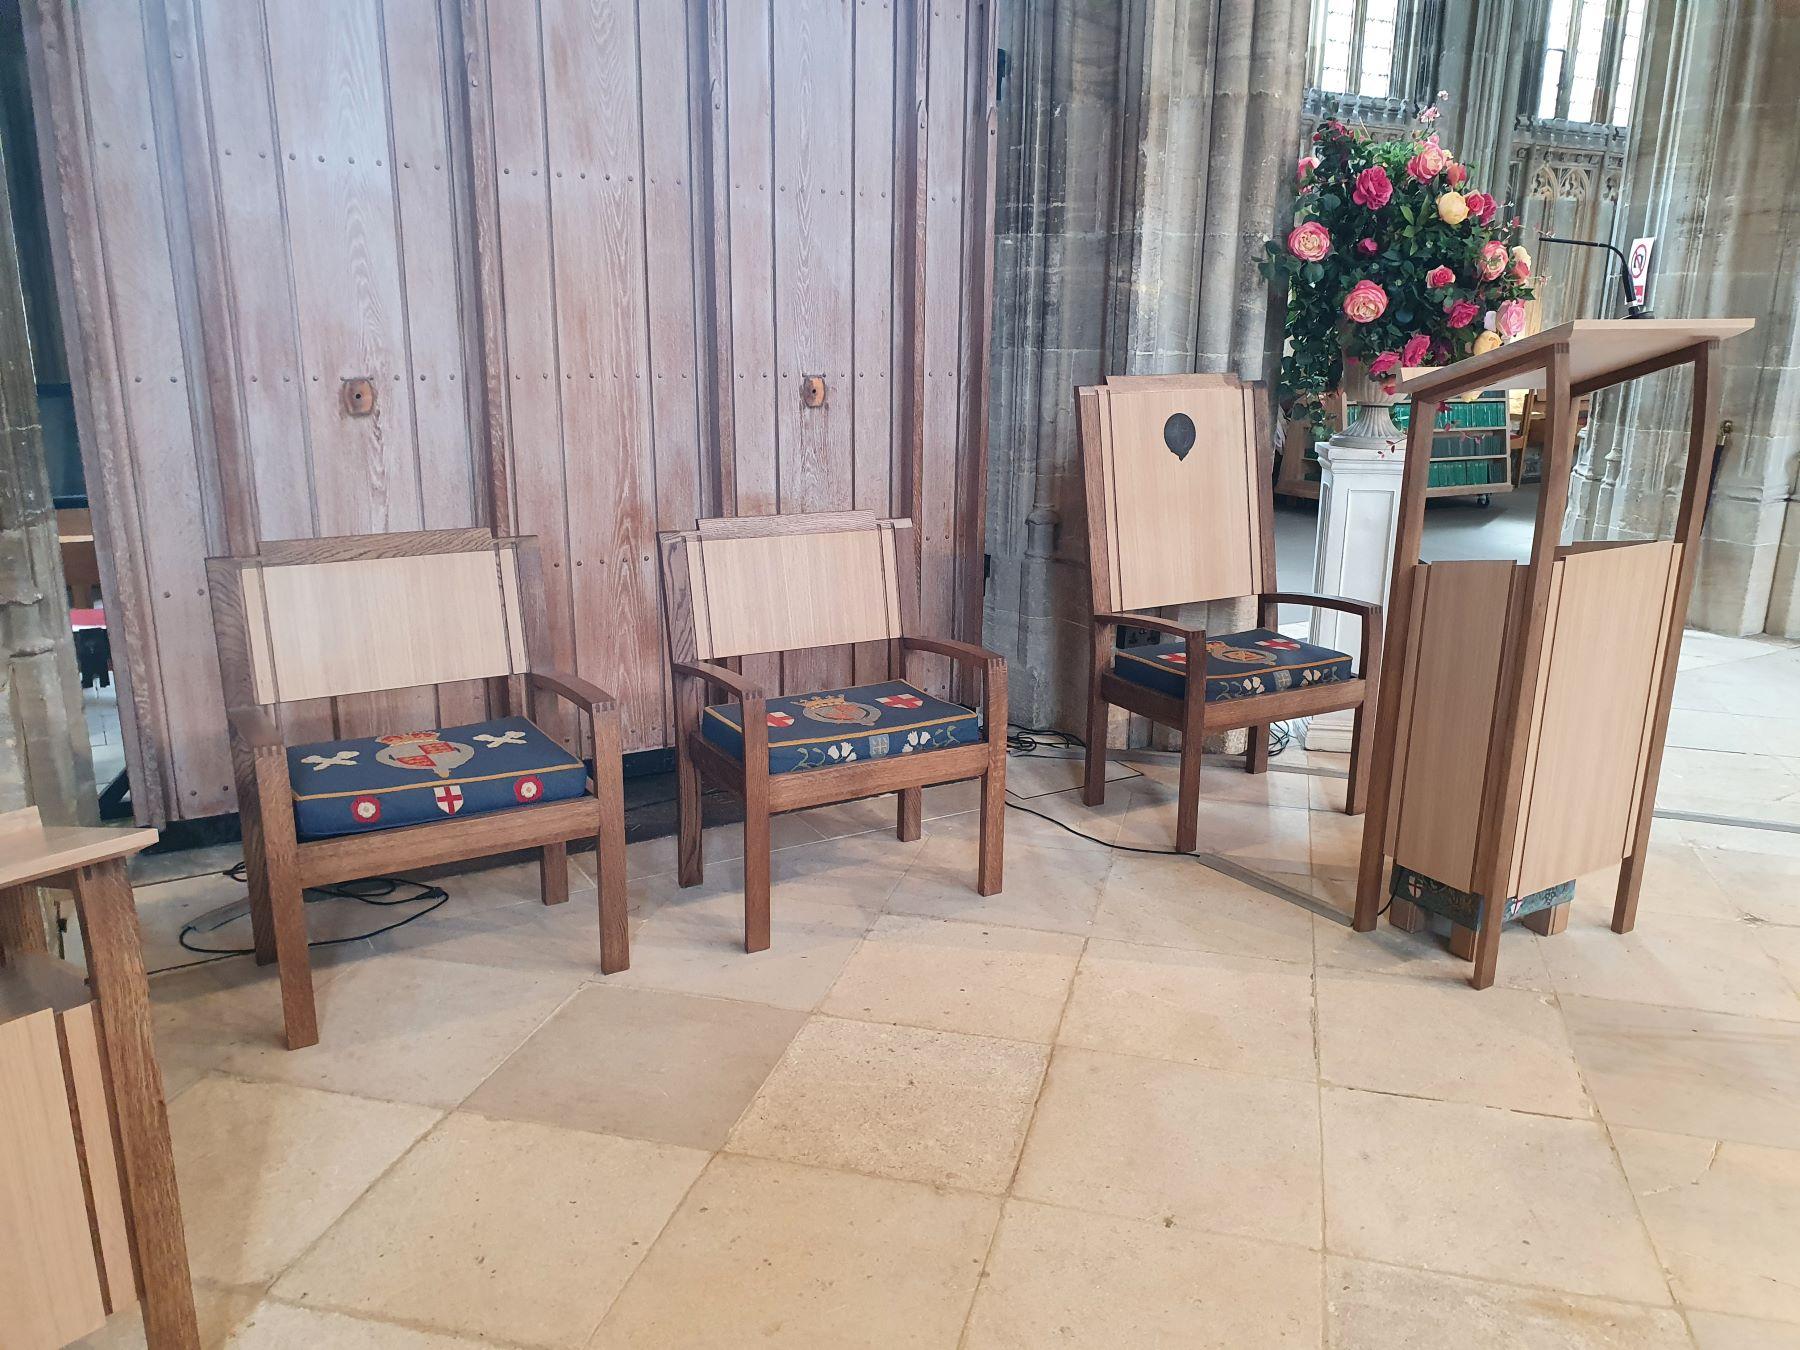 St Georges Chapel, Windsor Castle, clergy seating and high reader